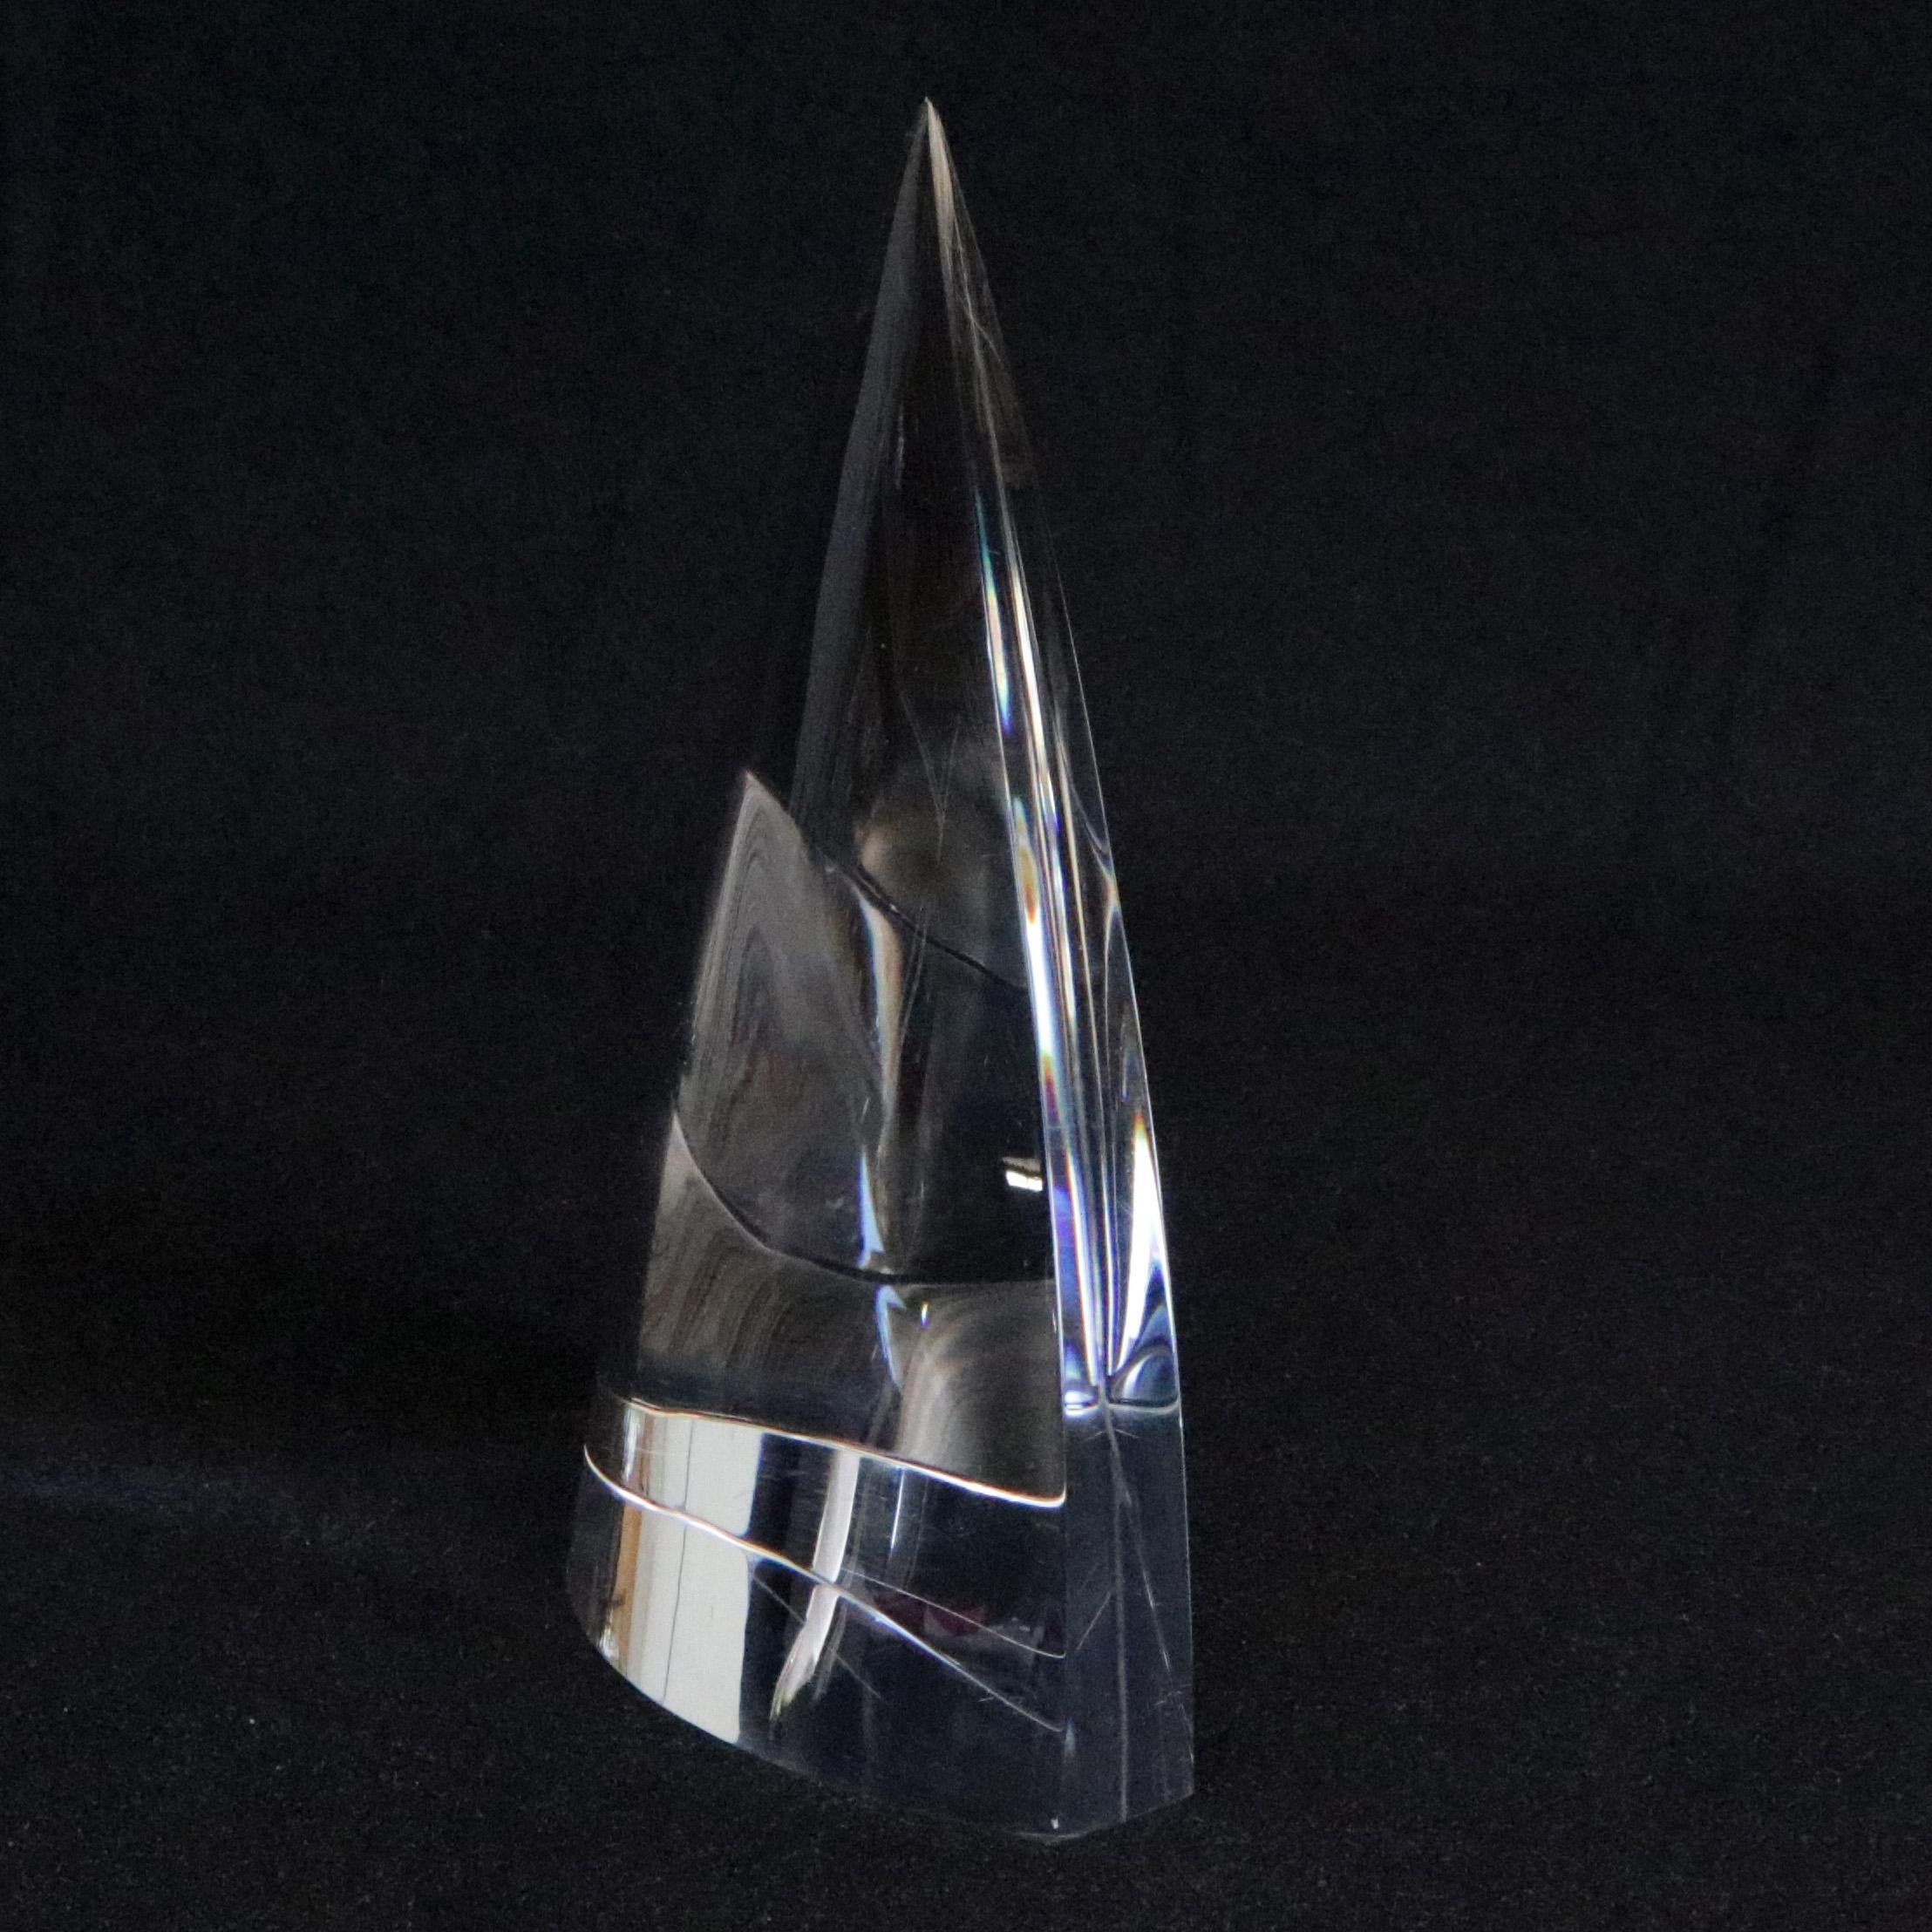 Midcentury steuben figurative mouth blown crystal sculptural paperweight feature colorless art glass in abstract form of sailboat main sail from Close To The Wind introduced in 1980, Corning Museum of Glass, New York, NY, signed on base, 20th